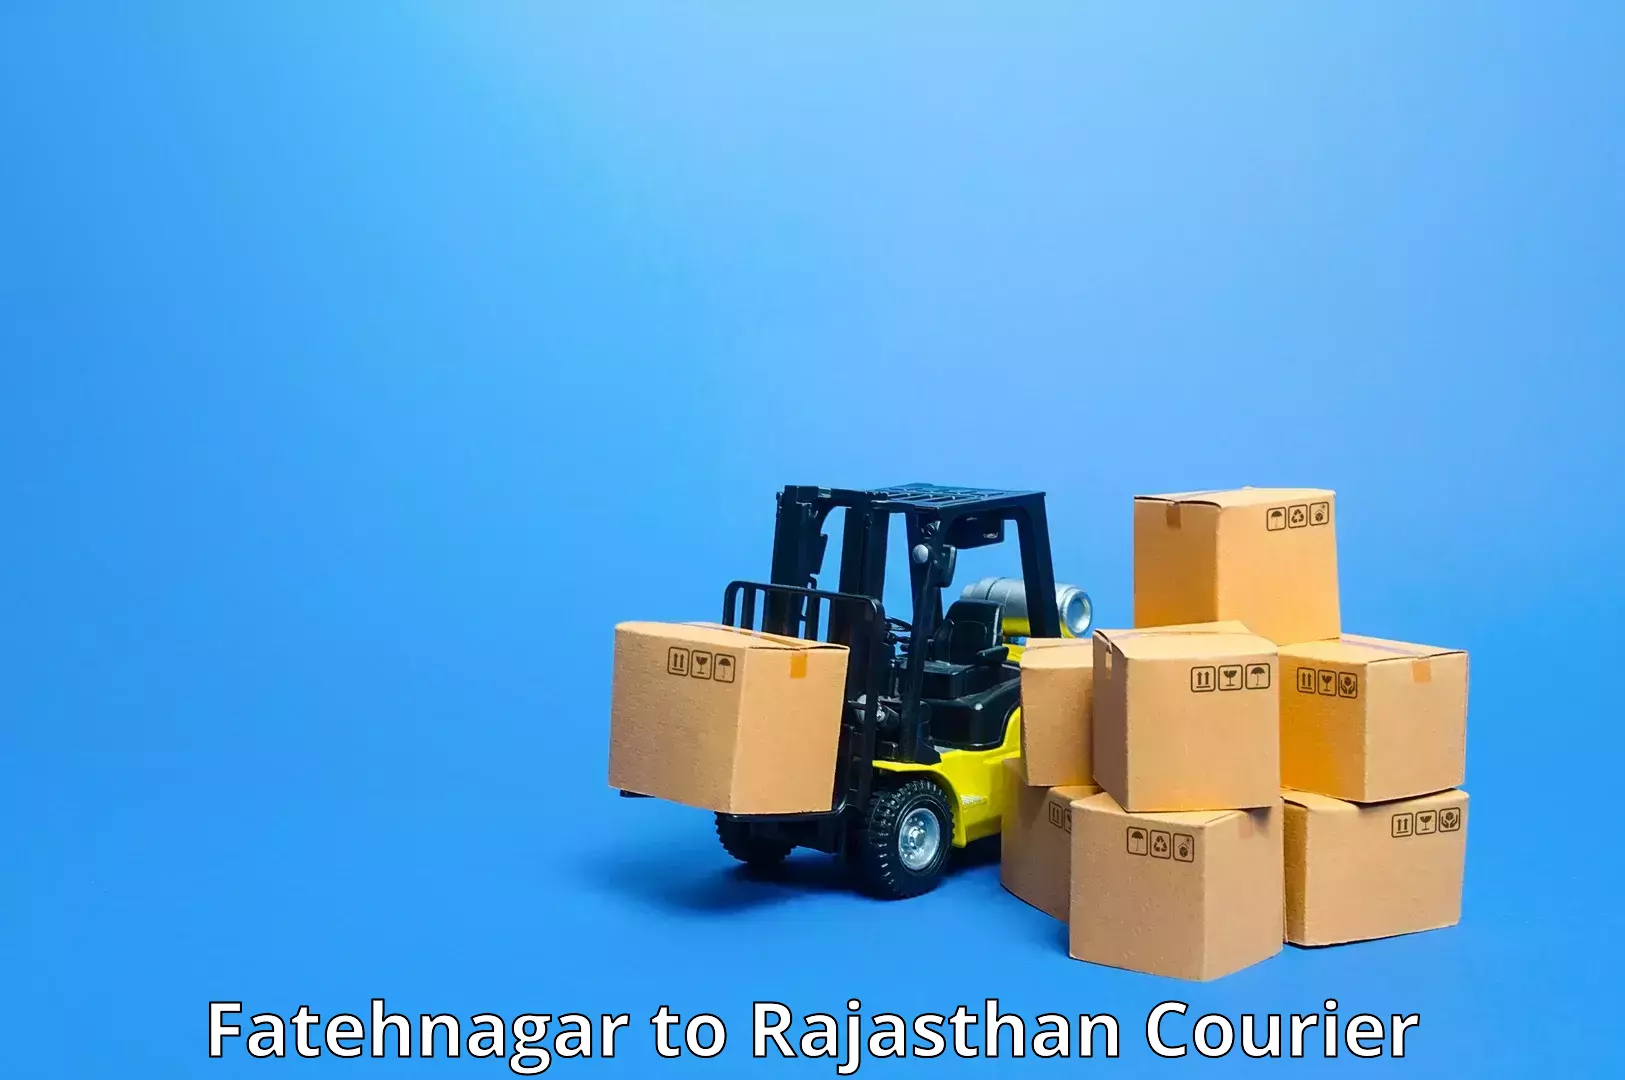 Courier service booking Fatehnagar to Rajasthan